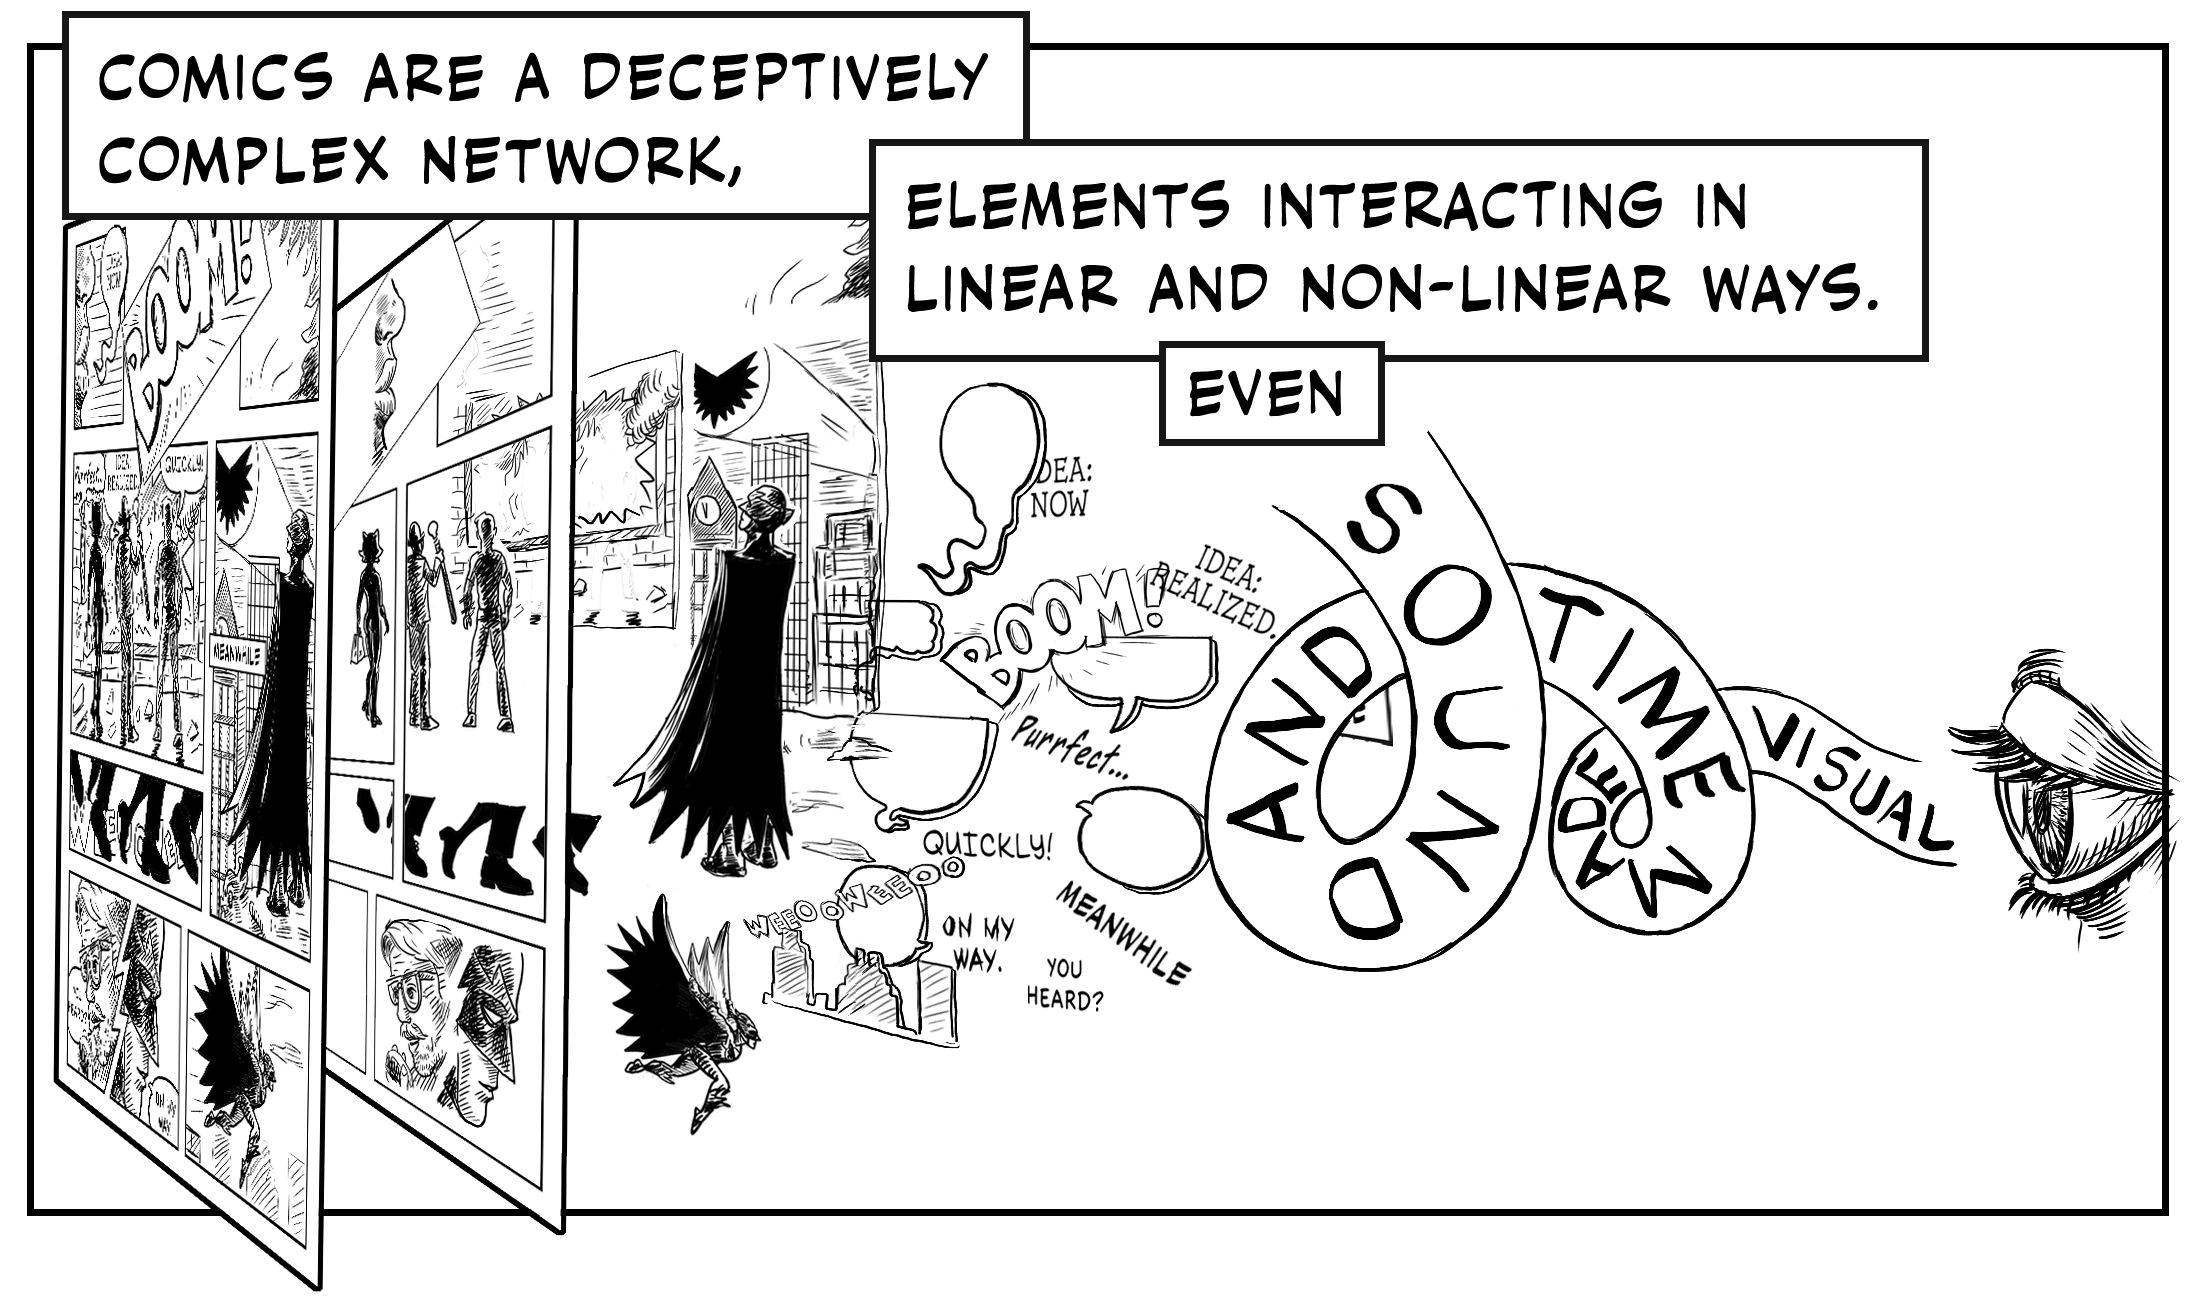 Panel 4: Text reads: “Comics are a deceptively complex network, elements interacting in linear and non-linear ways.” A page of our comic within the comic, starring superhero Blackout, exploded into all the different elements that go into a single sheet. First, the full panel layout. Next, we see a sheet with the characters. Then, the backgrounds and setting, a layer of the text balloons, and finally the words and sound effects. By the final layer, the panel barriers have dissolved so the final details - “Boom!” “Idea: Realized” “Purrfect” - all escape off the page, ending at a spiral of text that leads into the sight of a single isolated eyeball. More text: “Even sound and time made visual.” 